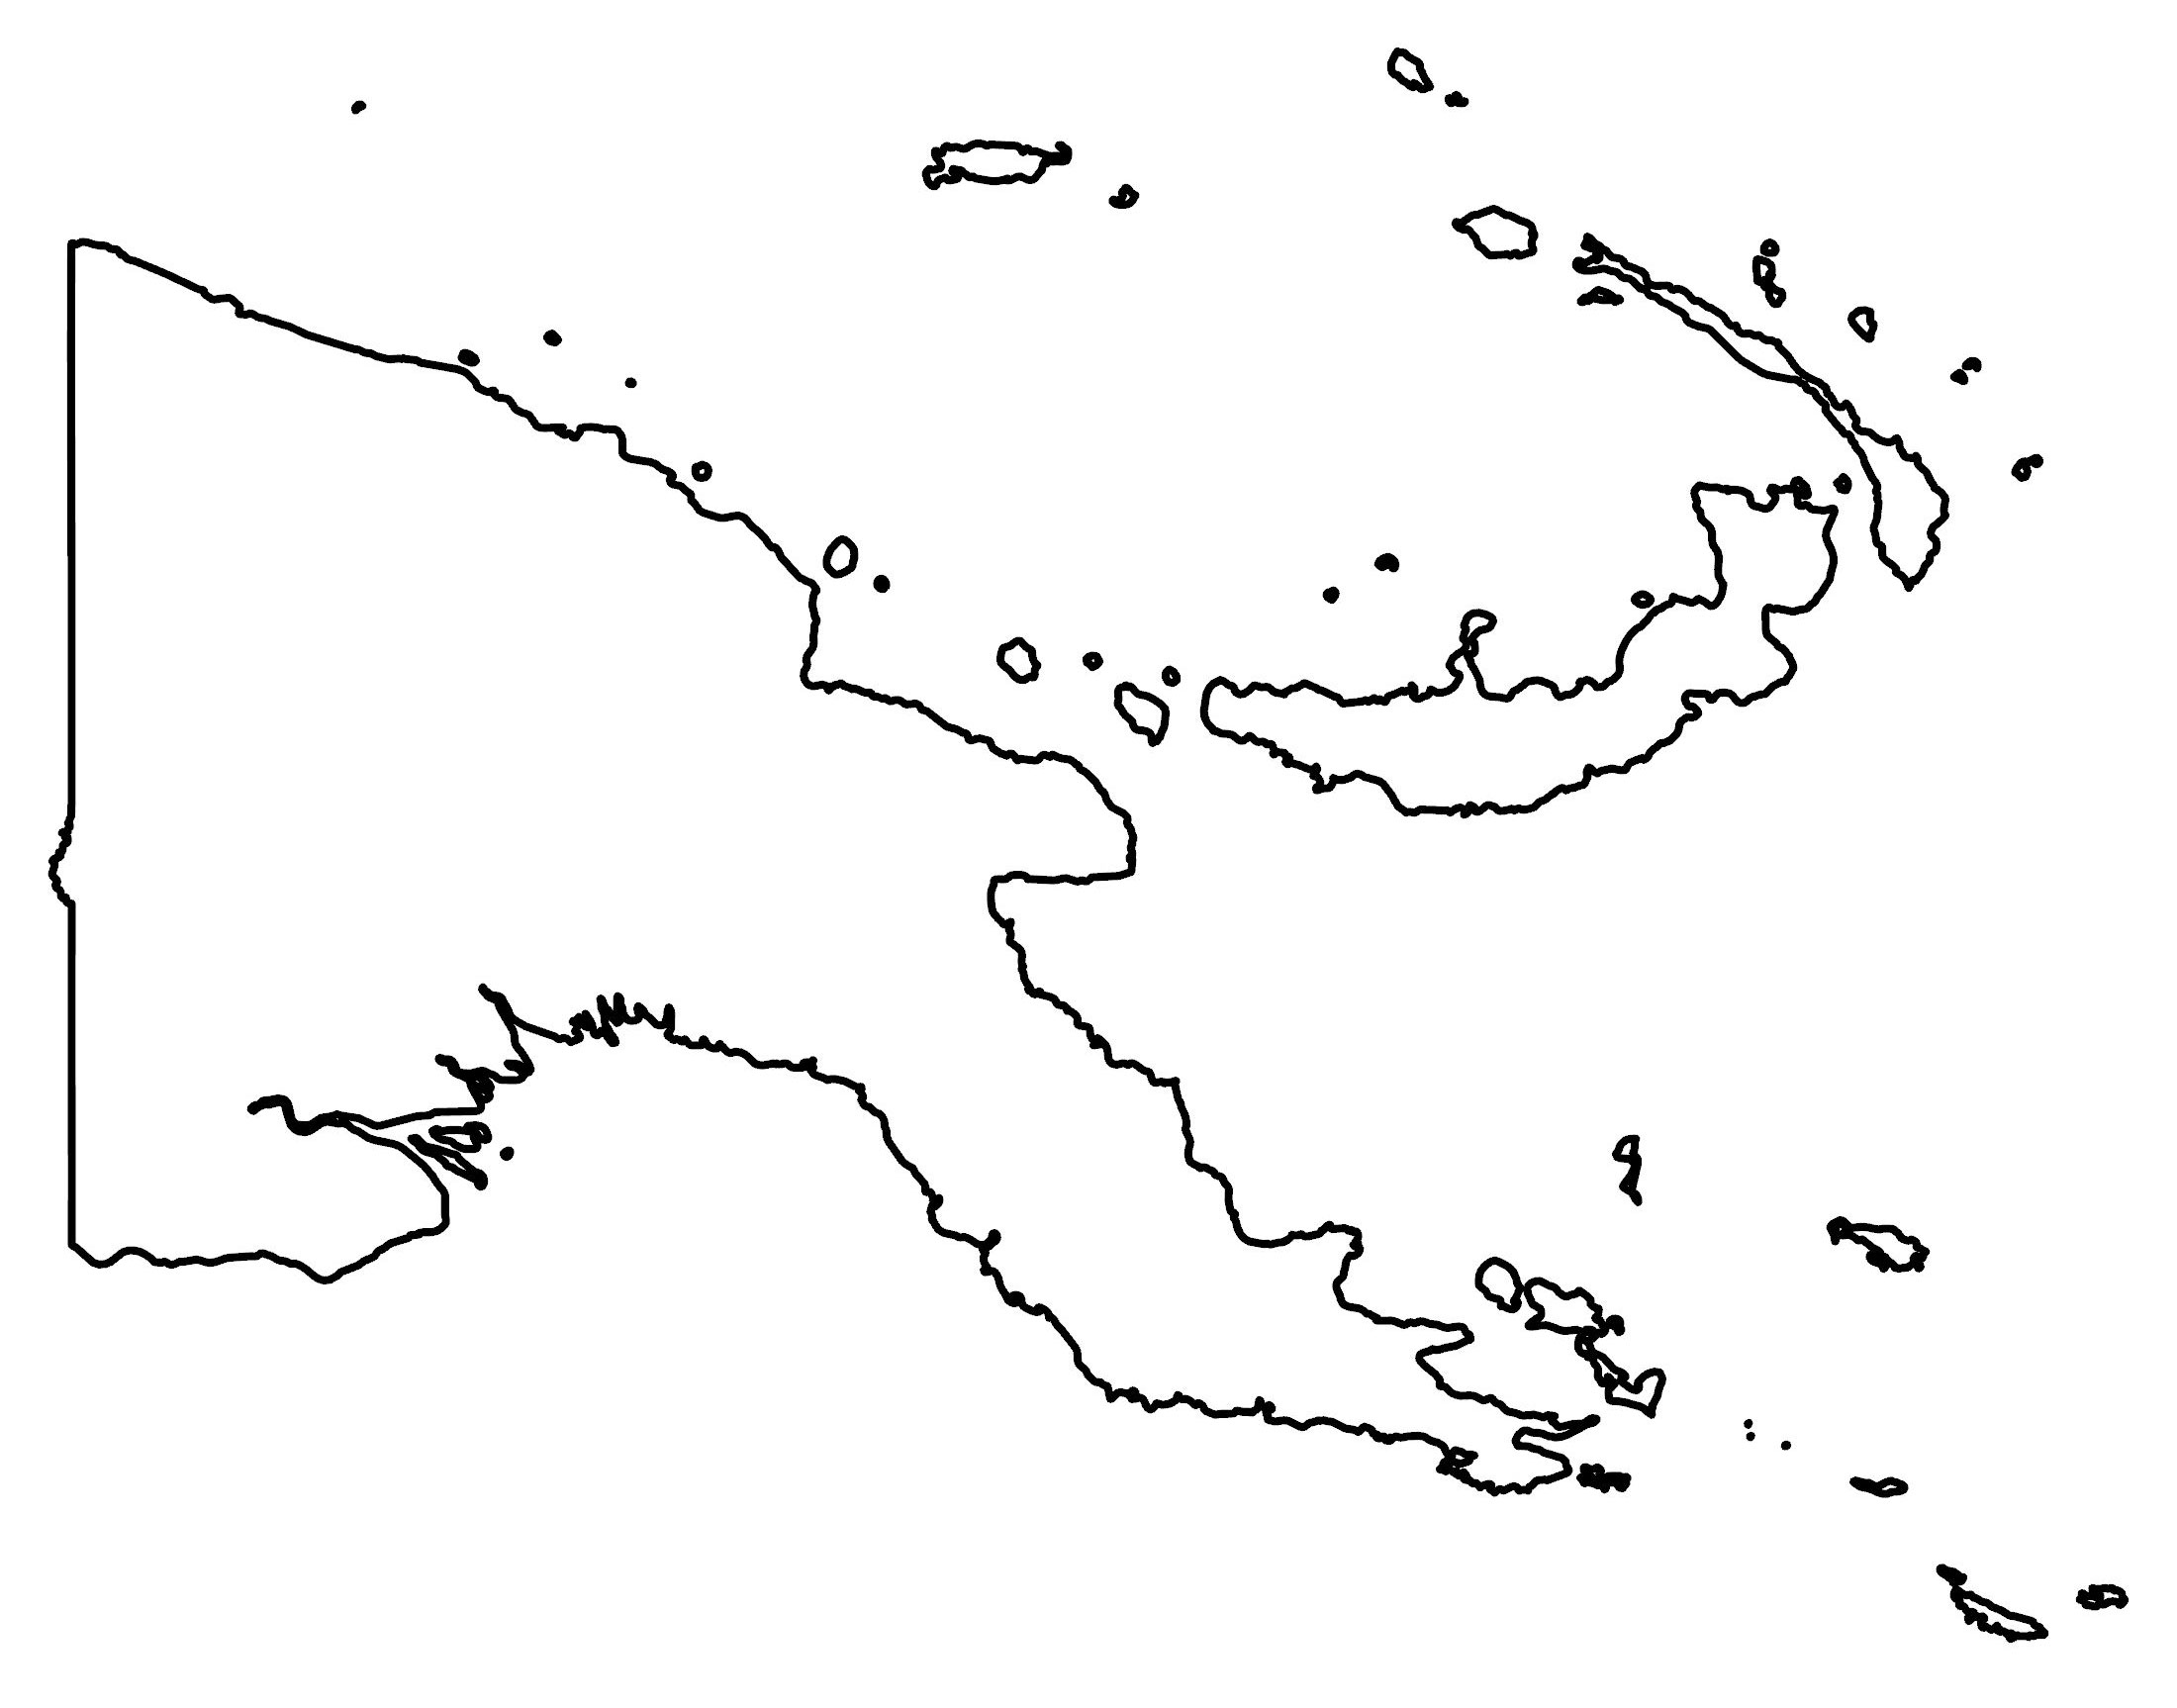 Oceania blank map and country outlines